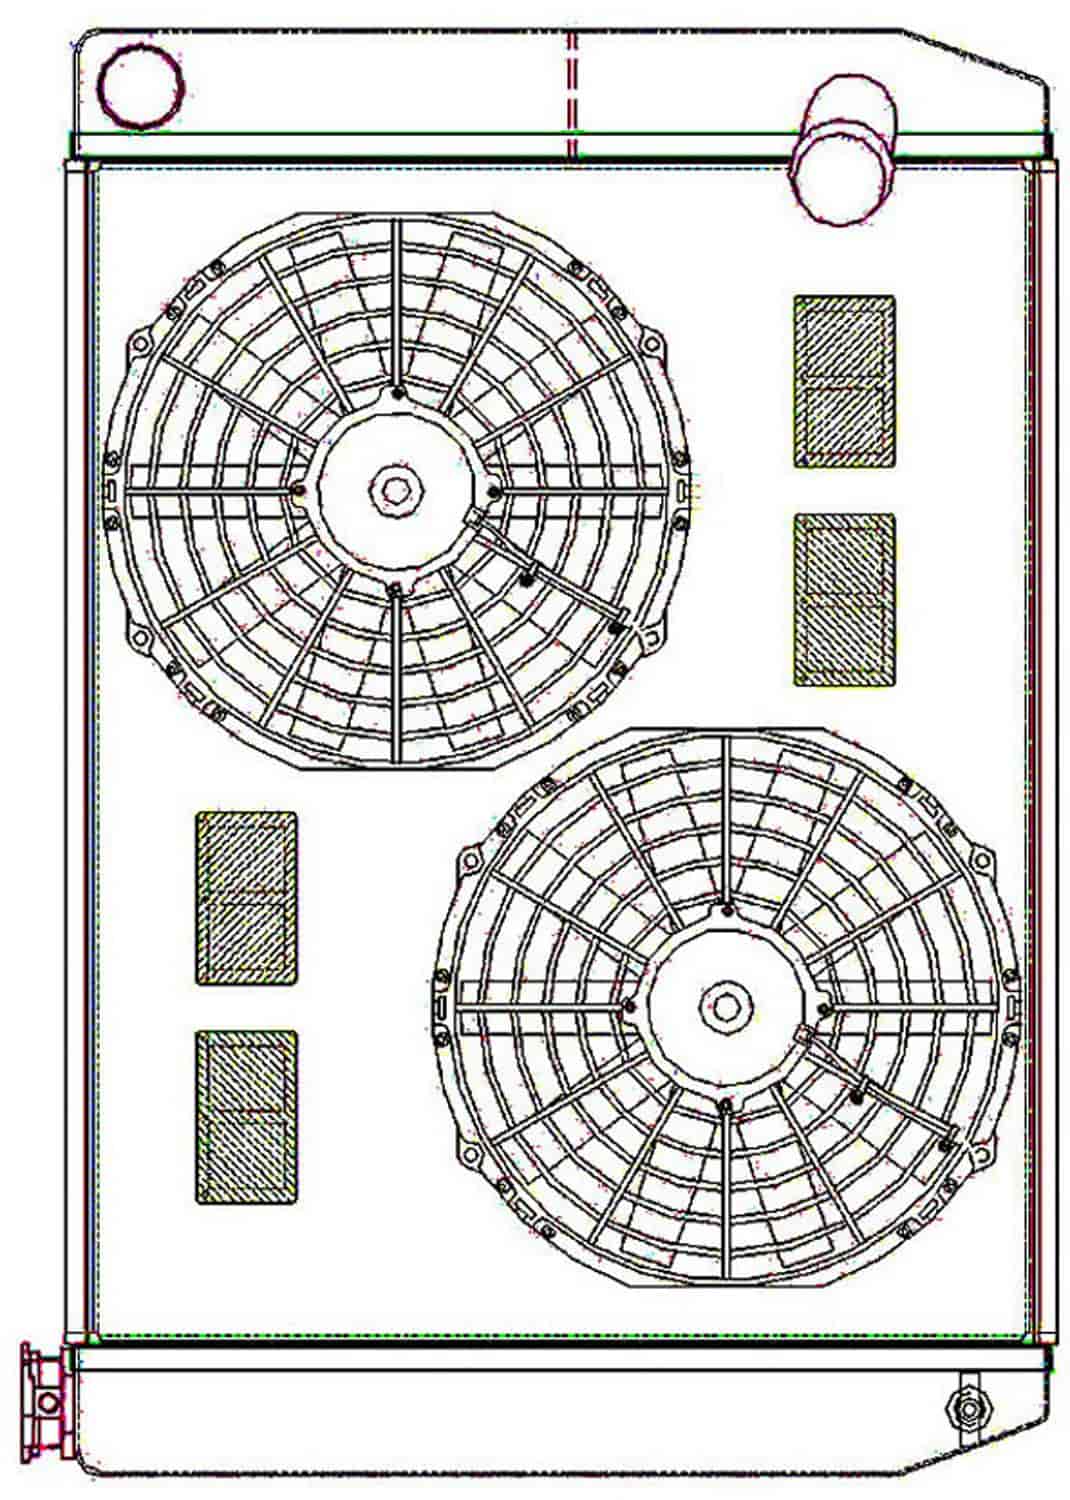 ClassicCool ComboUnit Universal Fit Radiator and Fan Dual Pass Crossflow Design 27.50" x 19" with No Options